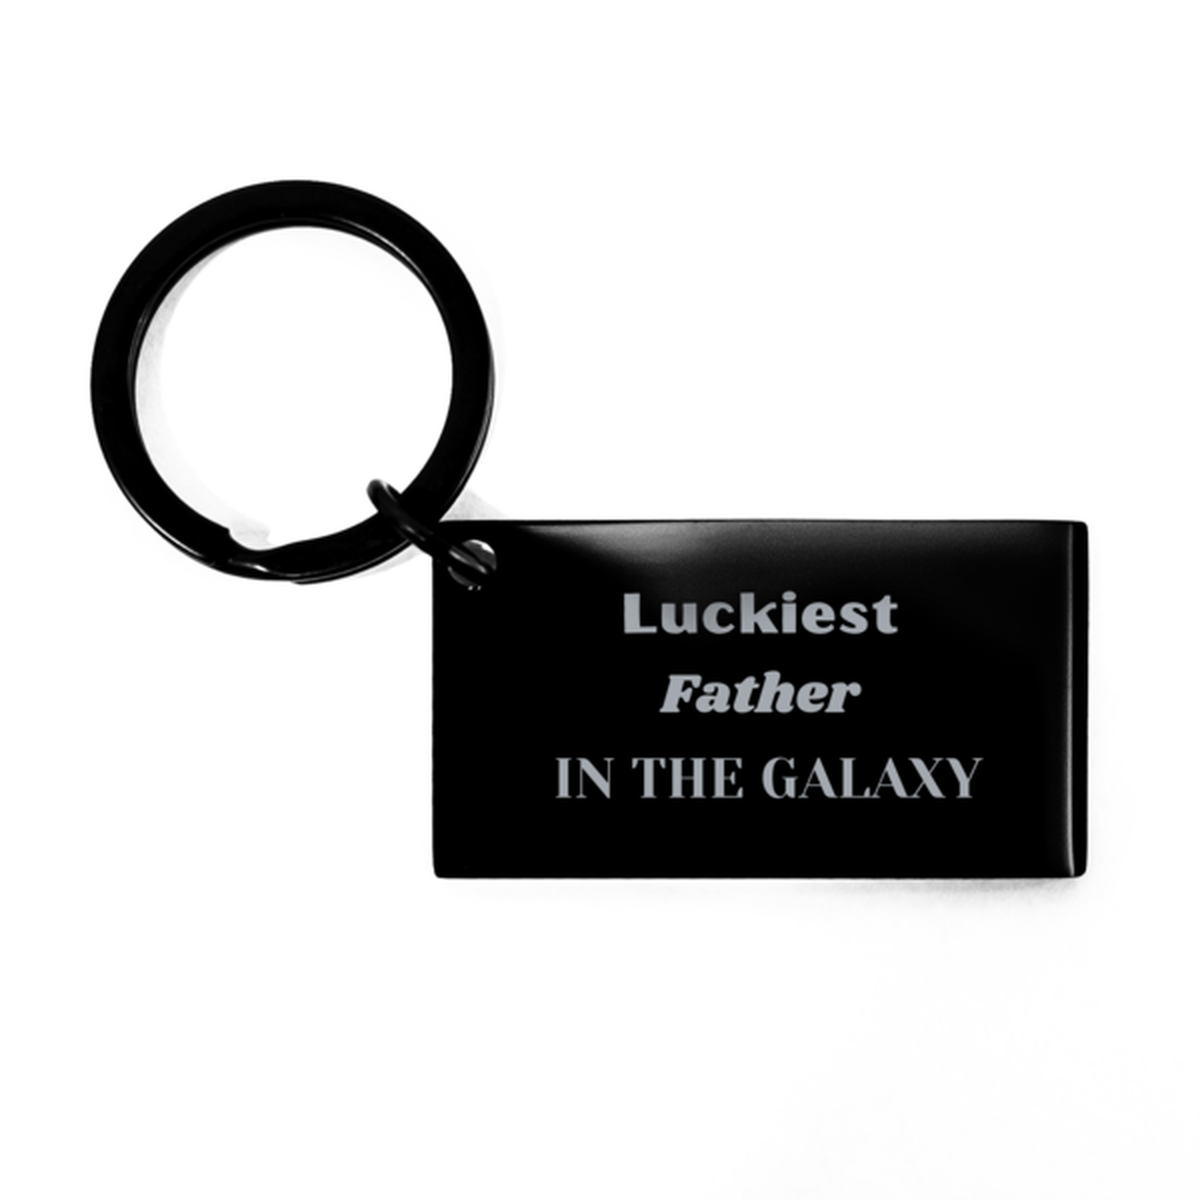 Luckiest Father in the Galaxy, To My Father Engraved Gifts, Christmas Father Keychain Gifts, X-mas Birthday Unique Gifts For Father Men Women